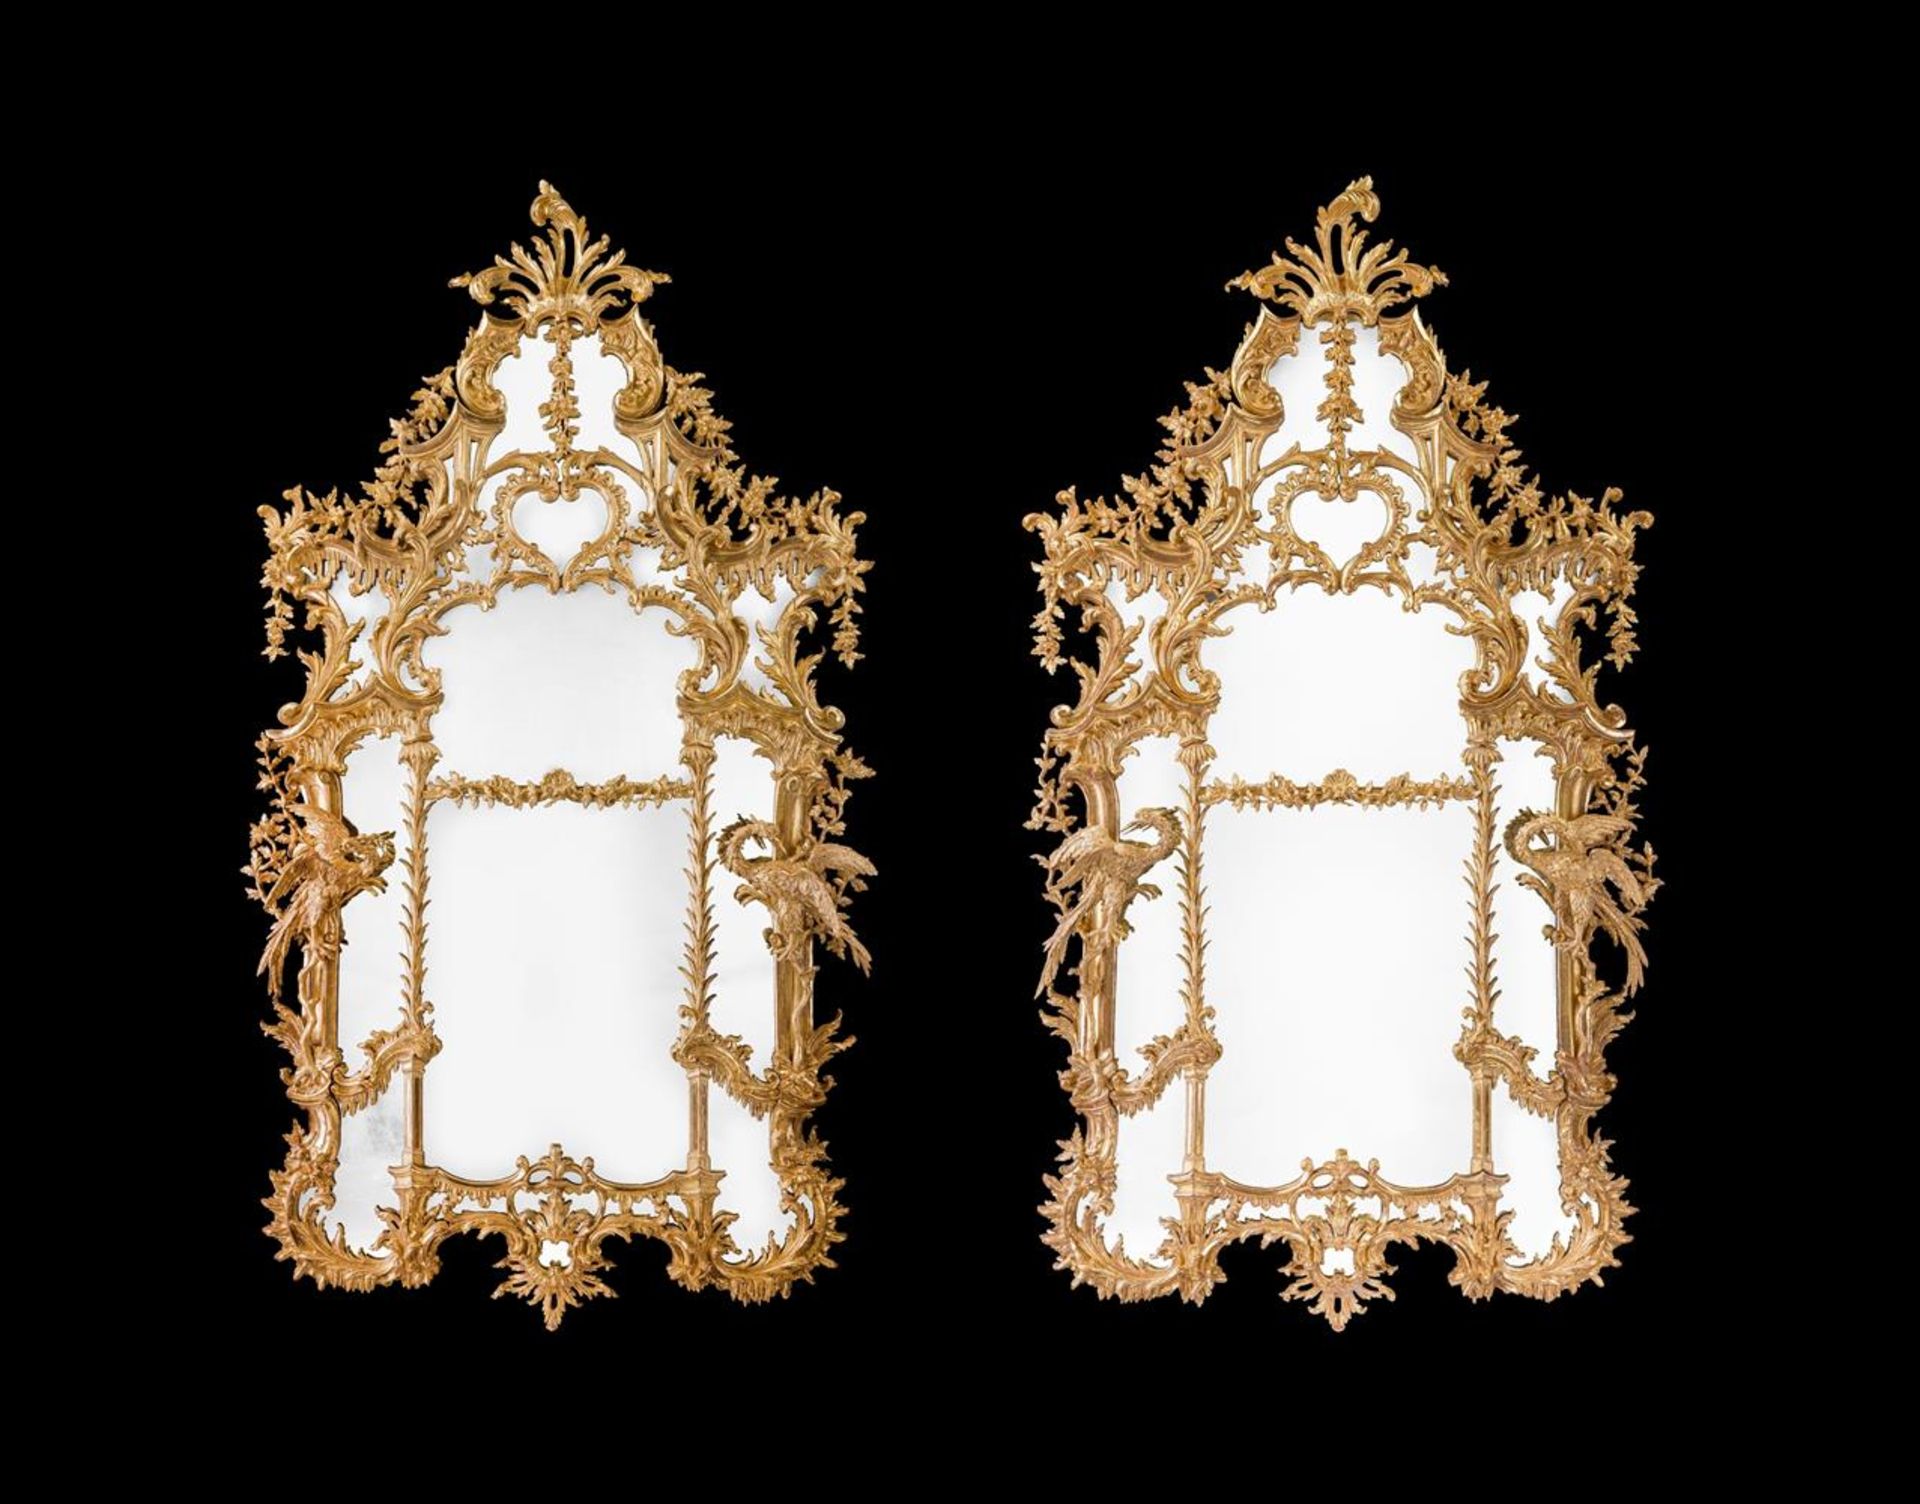 A PAIR OF MONUMENTAL CARVED GILTWOOD PIER MIRRORS, LATE 18TH OR 19TH CENTURY